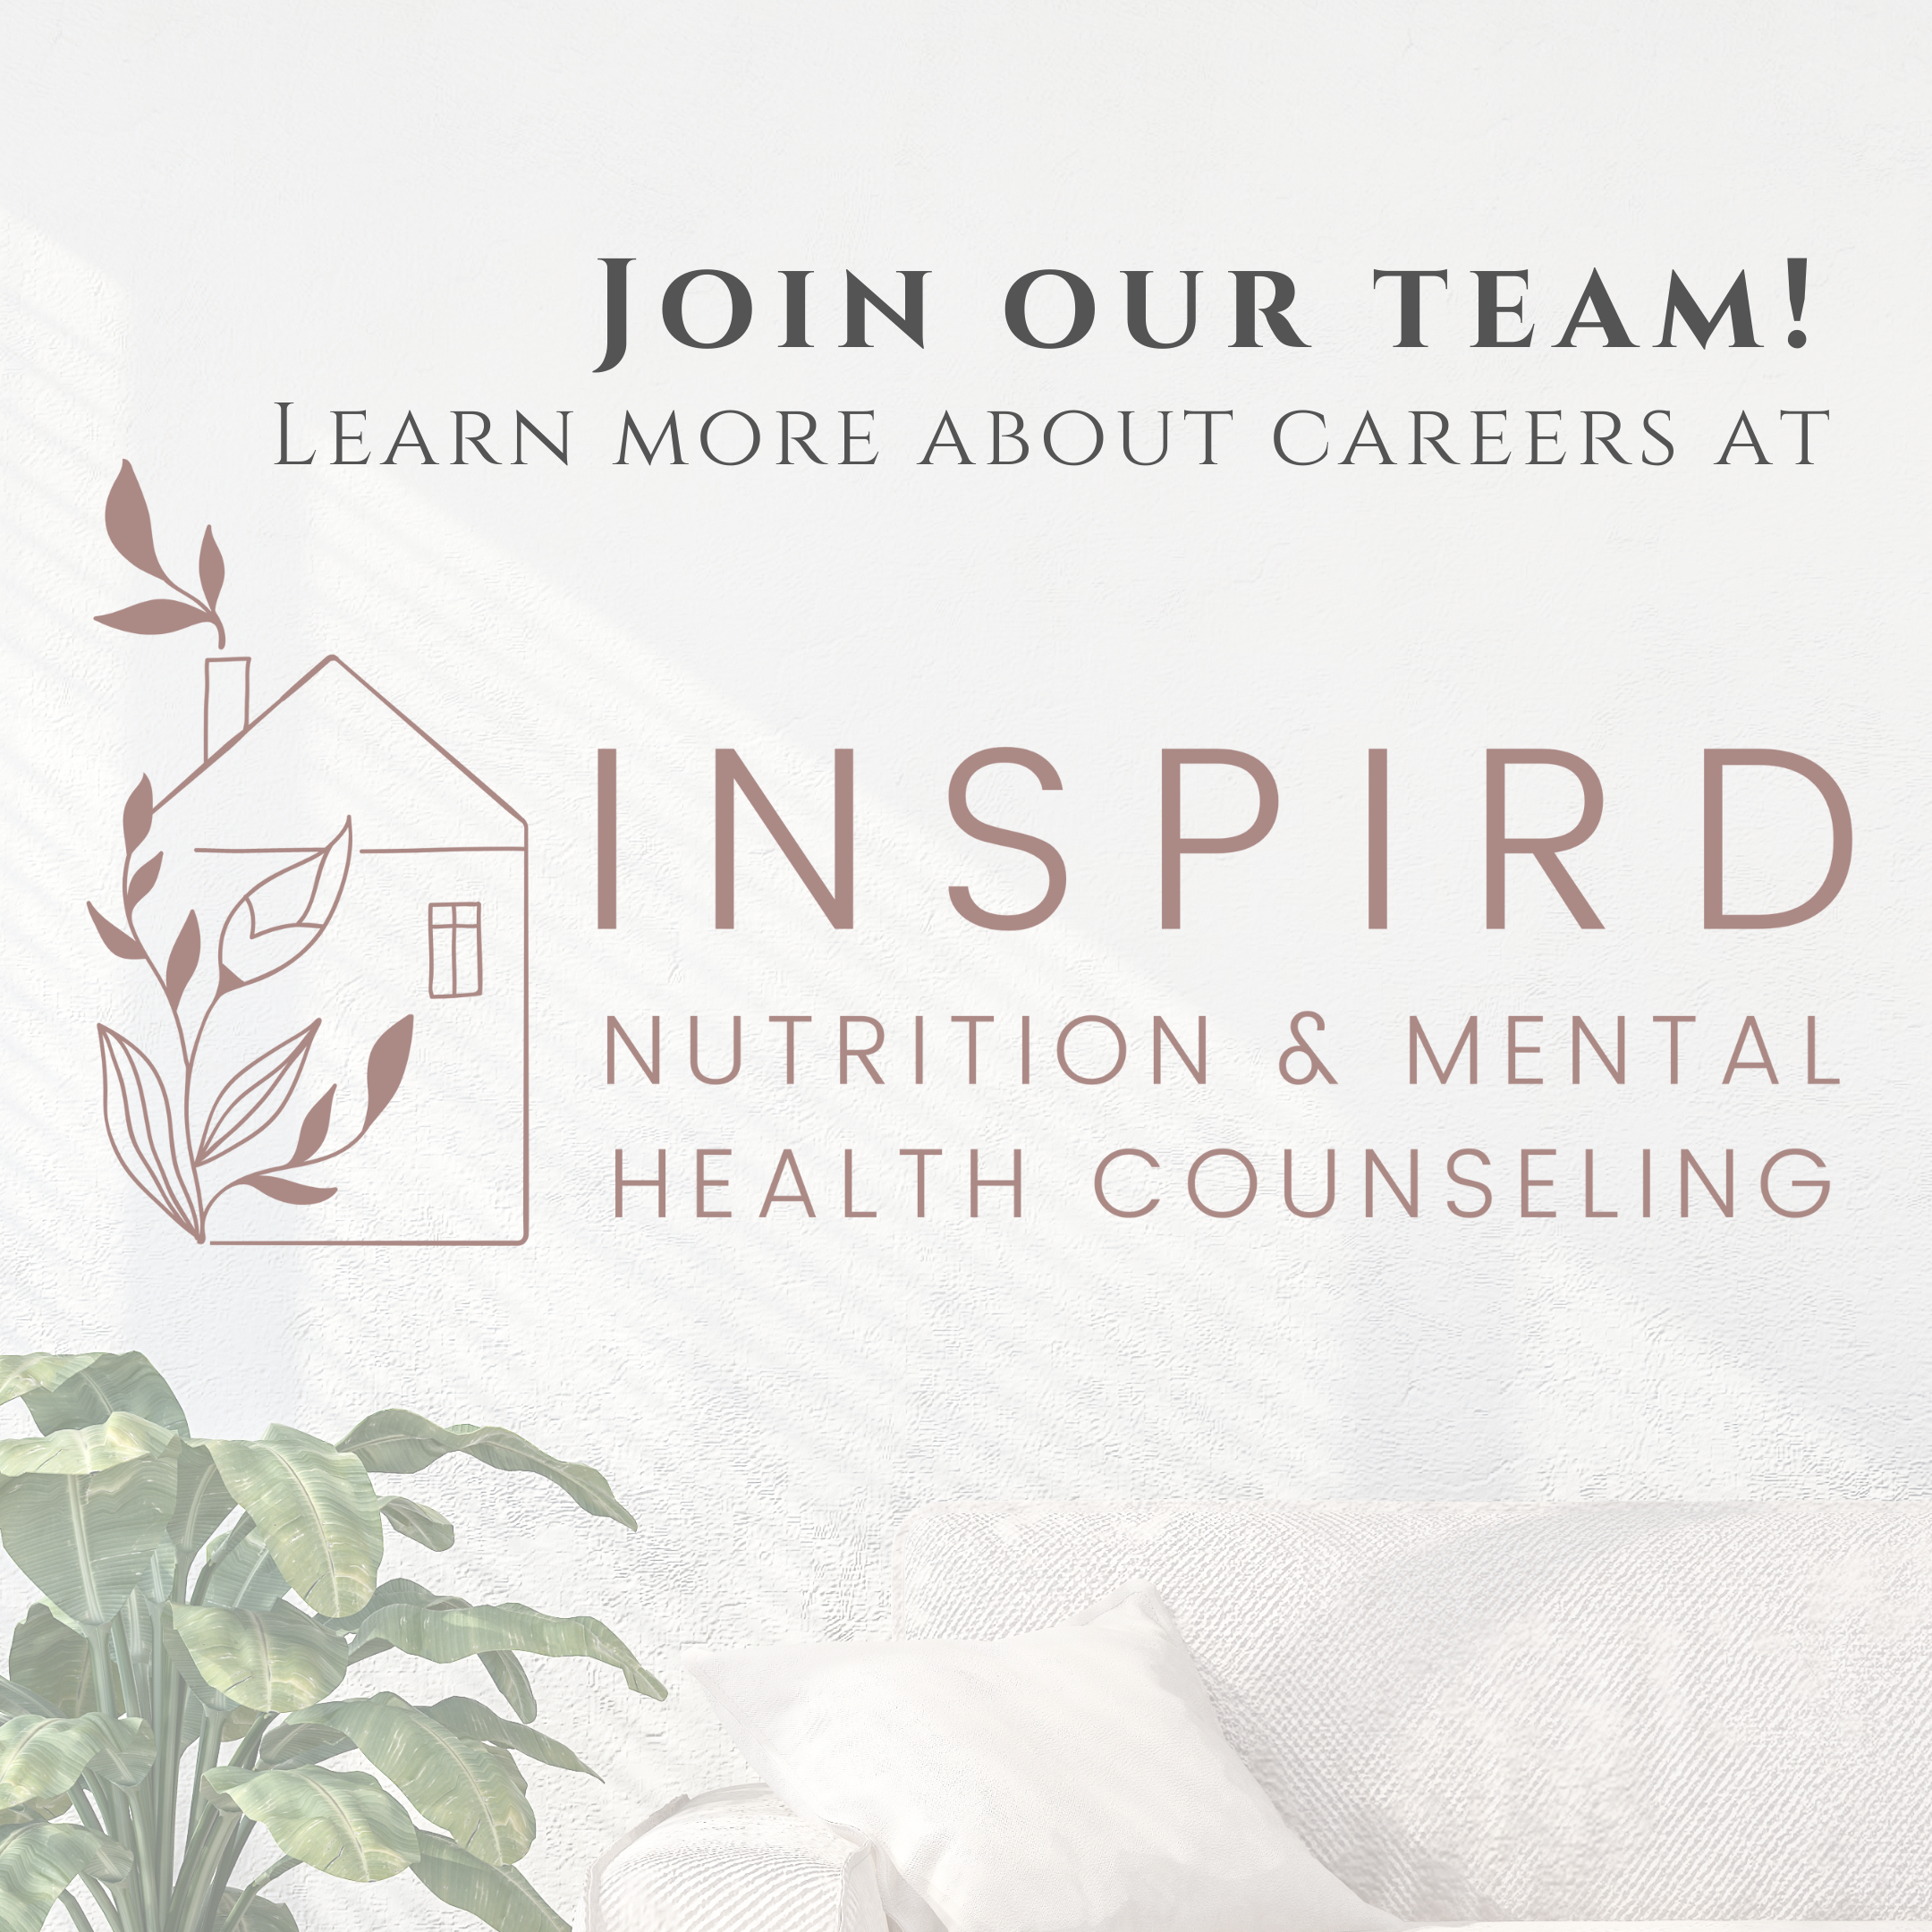 INSPIRD Nutrition & Mental Health Counseling